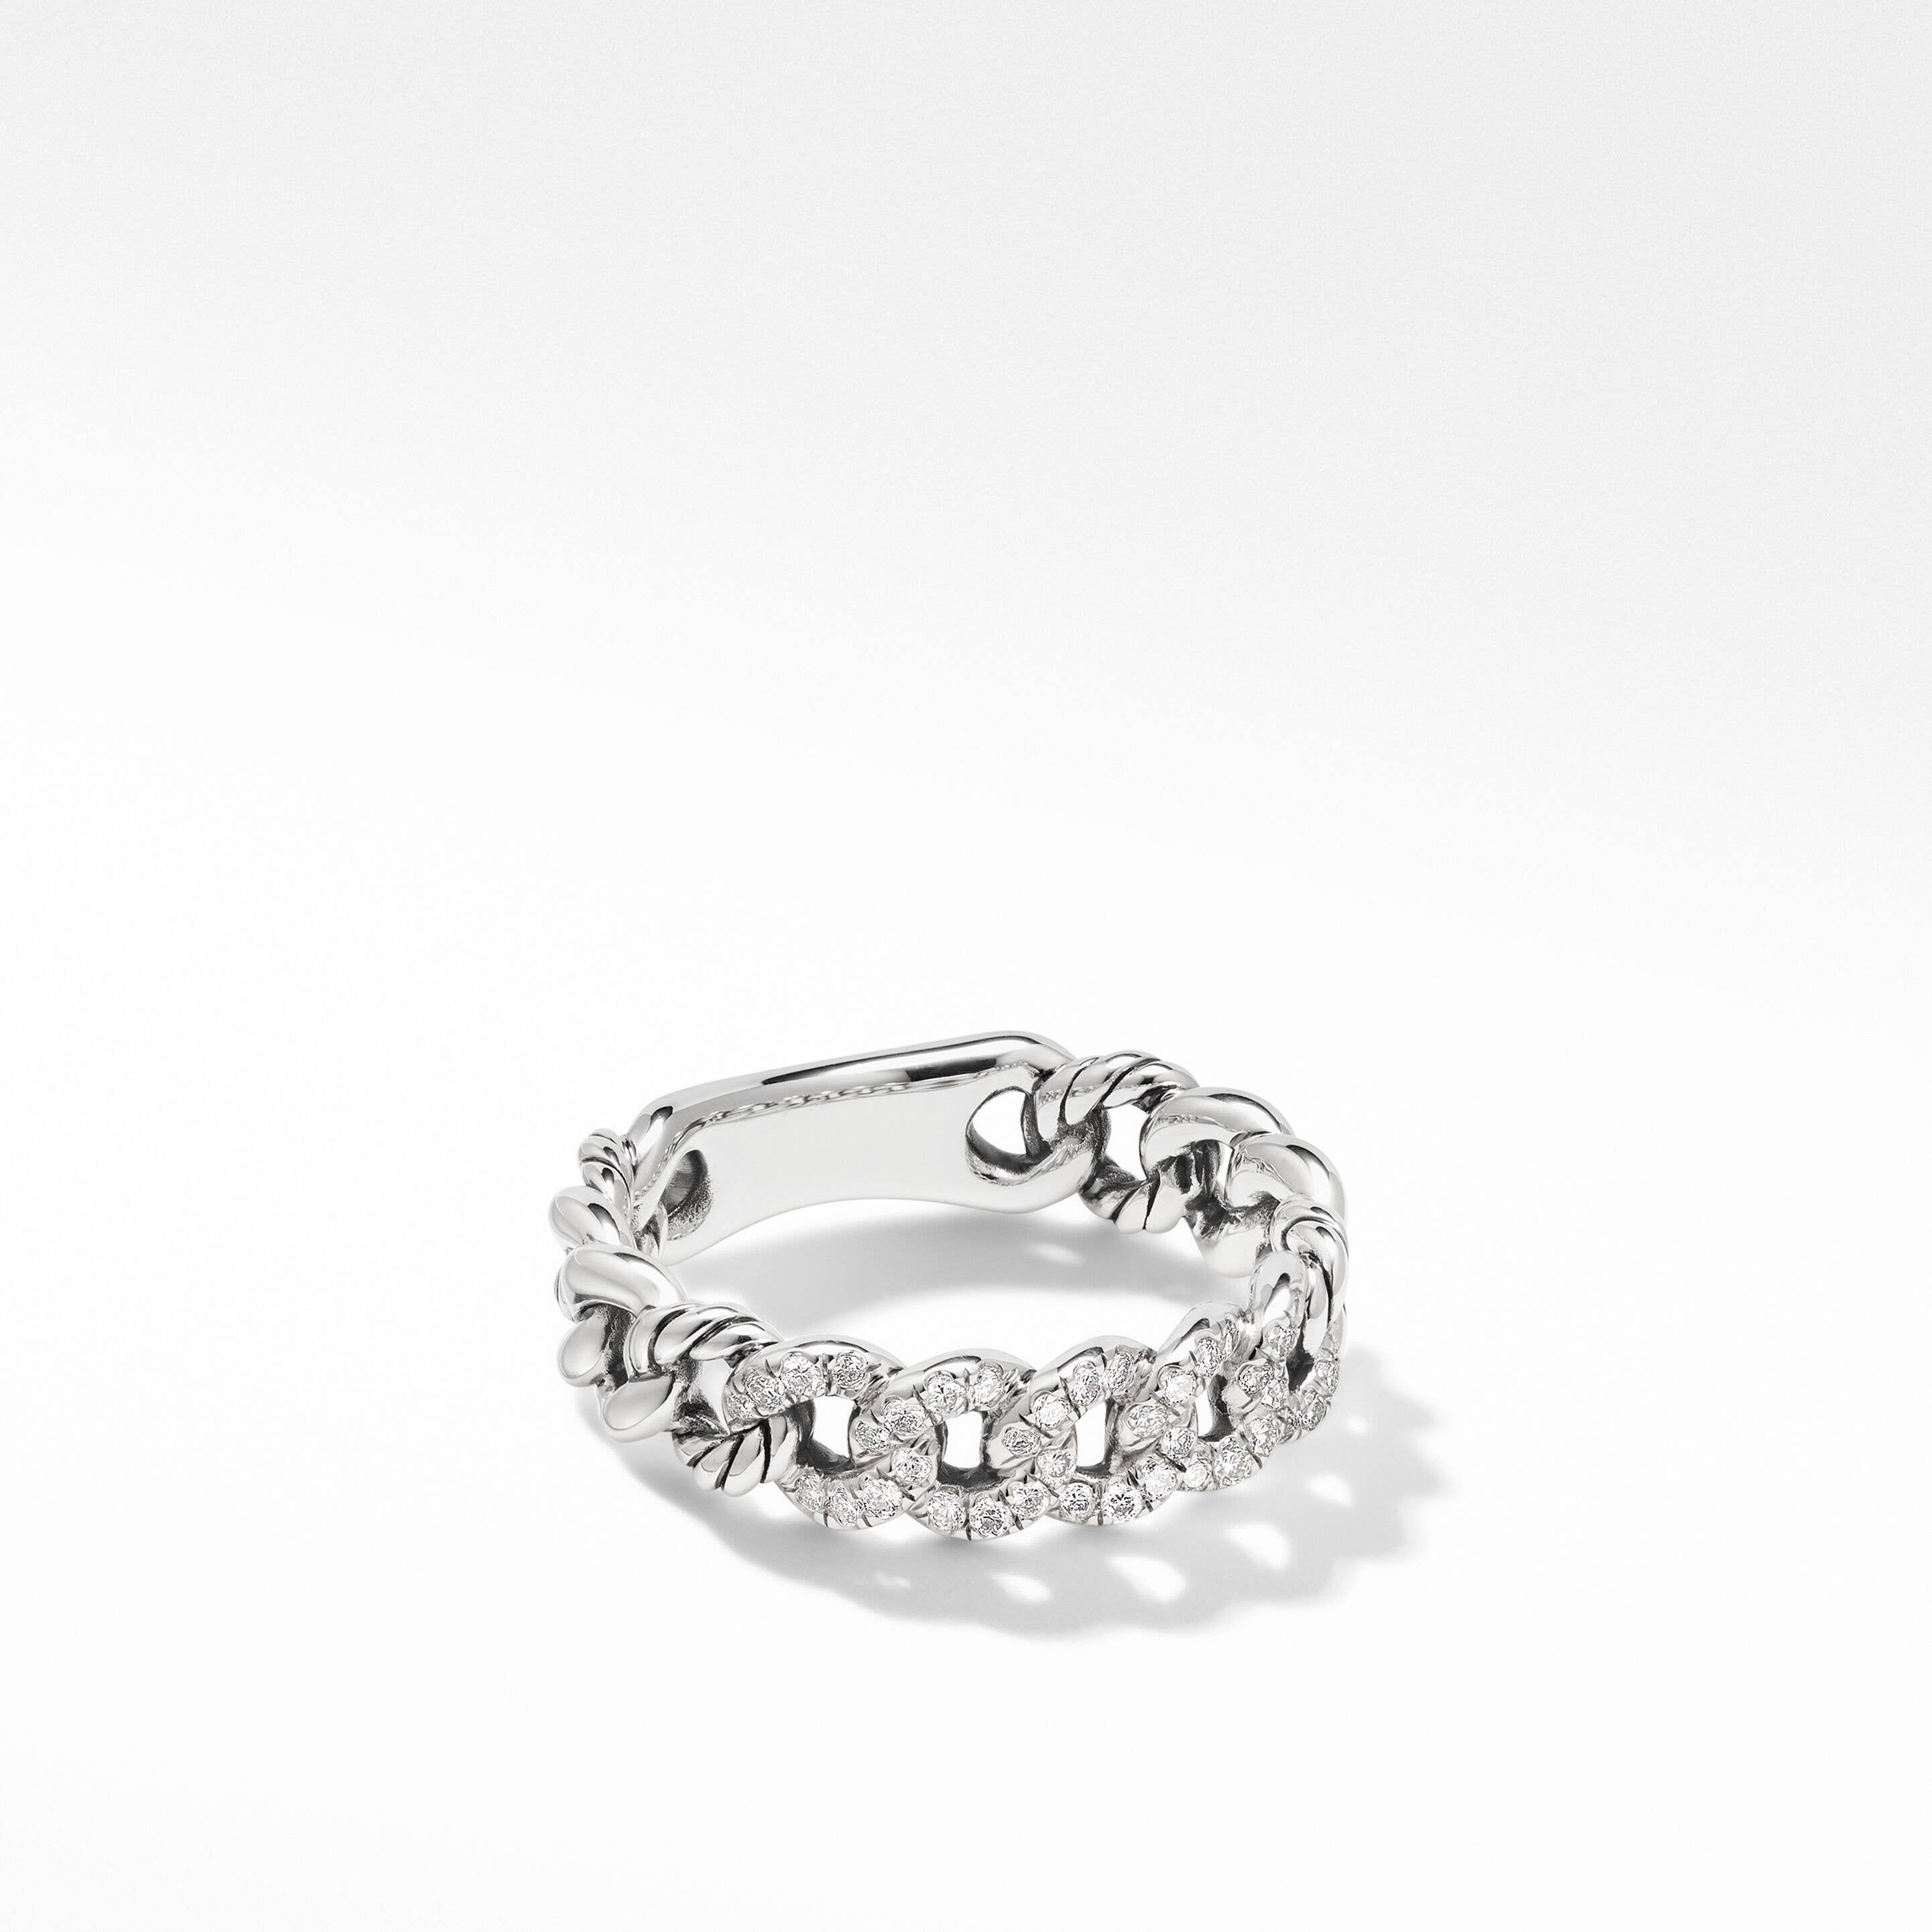 Belmont® Curb Link Band Ring in Sterling Silver with Pavé Diamonds